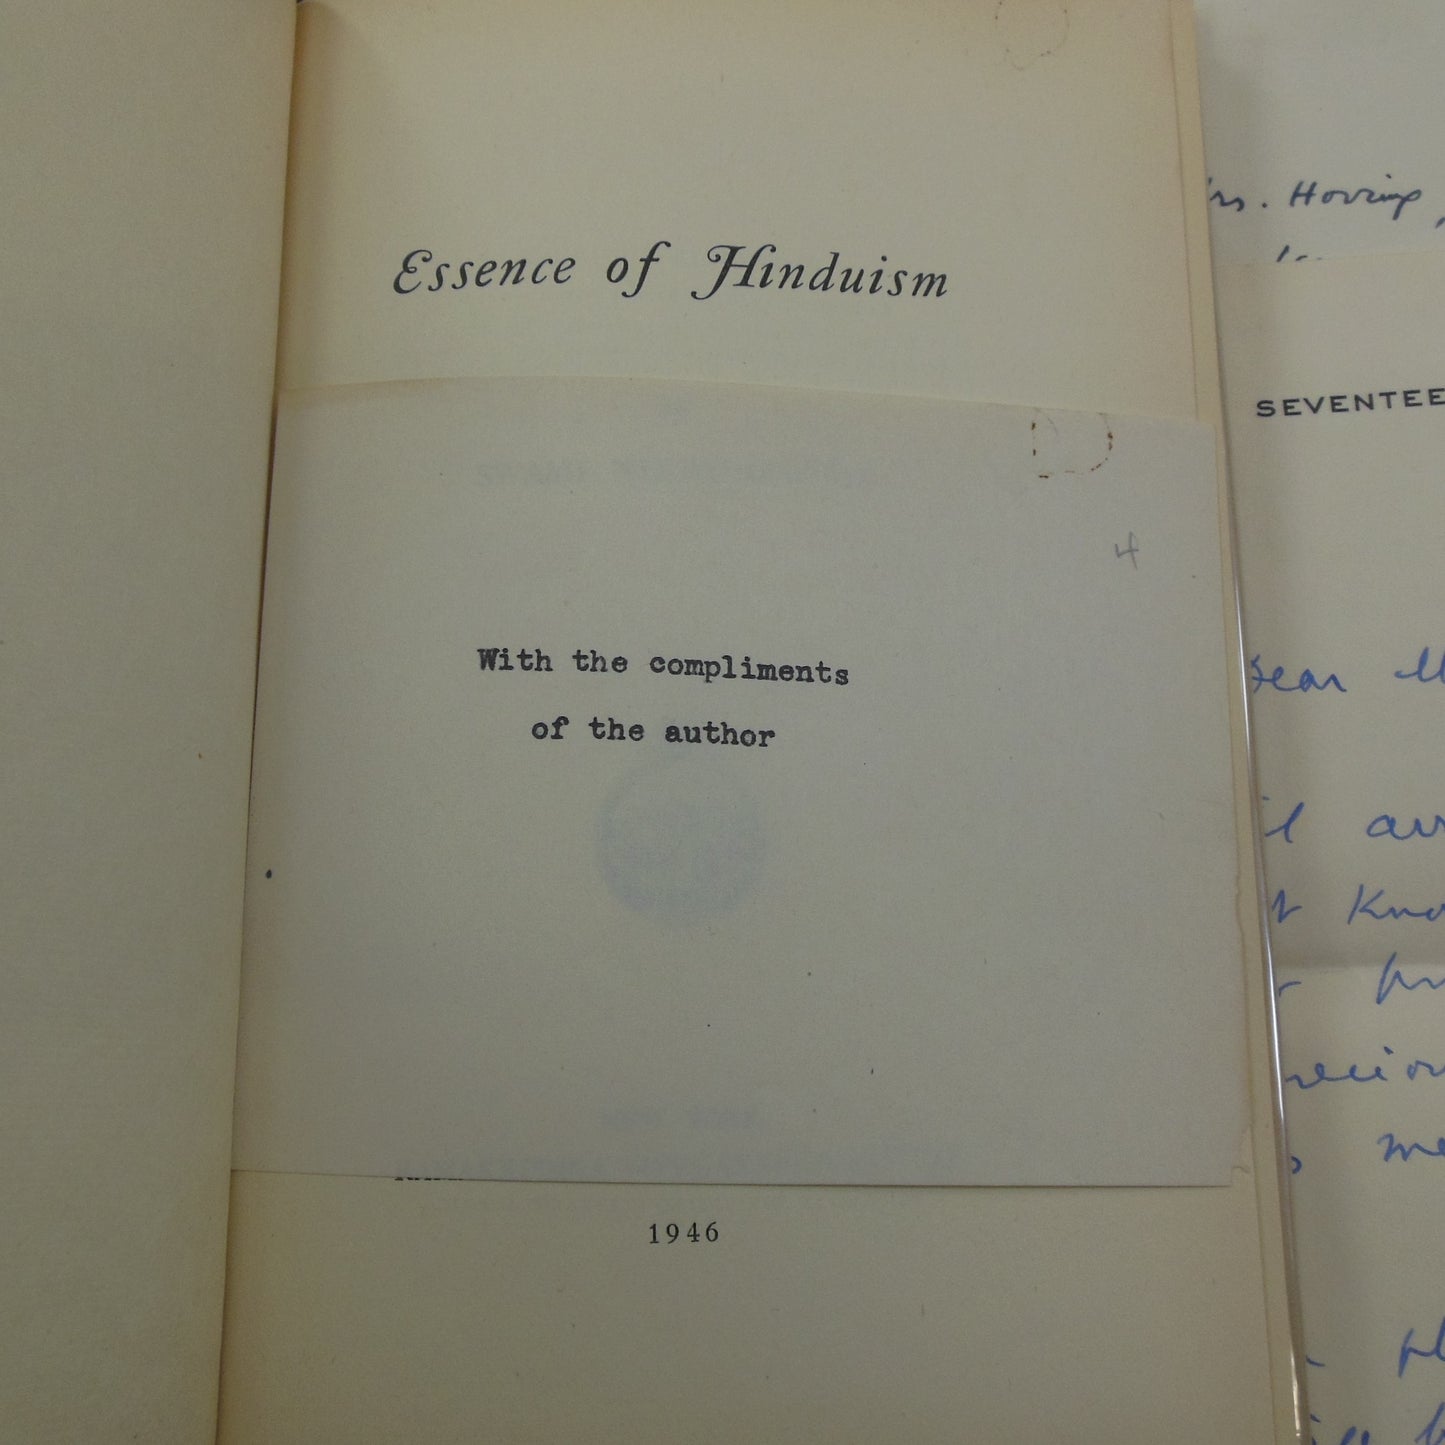 Swami Nikhilananda Signed Letters in Book - Essence of Hinduism 1946 compliments of author